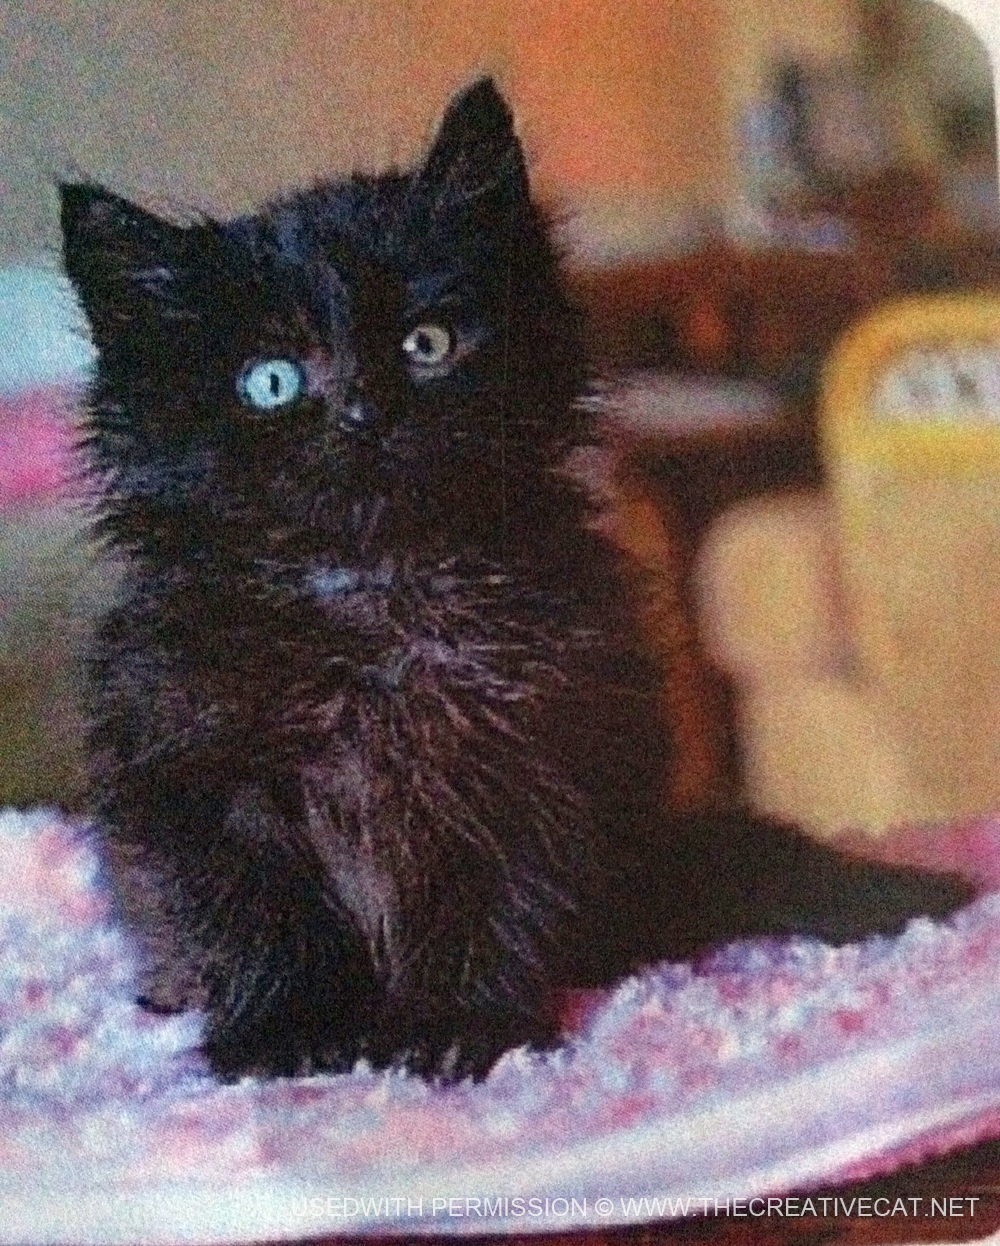 Princess's baby picture